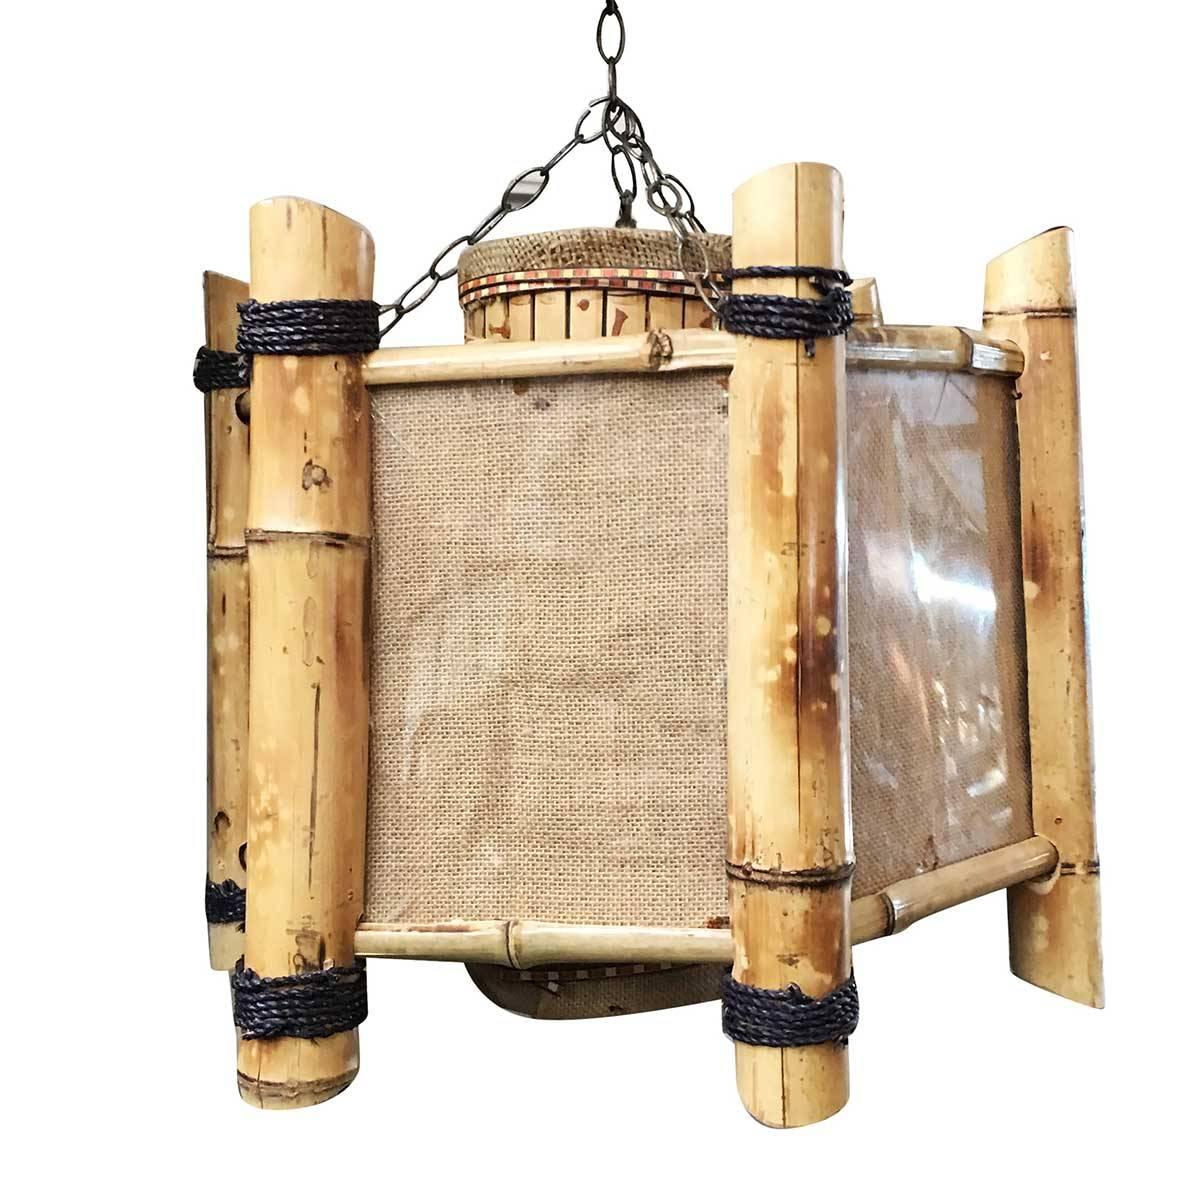 Post-War bamboo octagon chandelier hanging lamp with glass/rice paper shade.

3-Available 